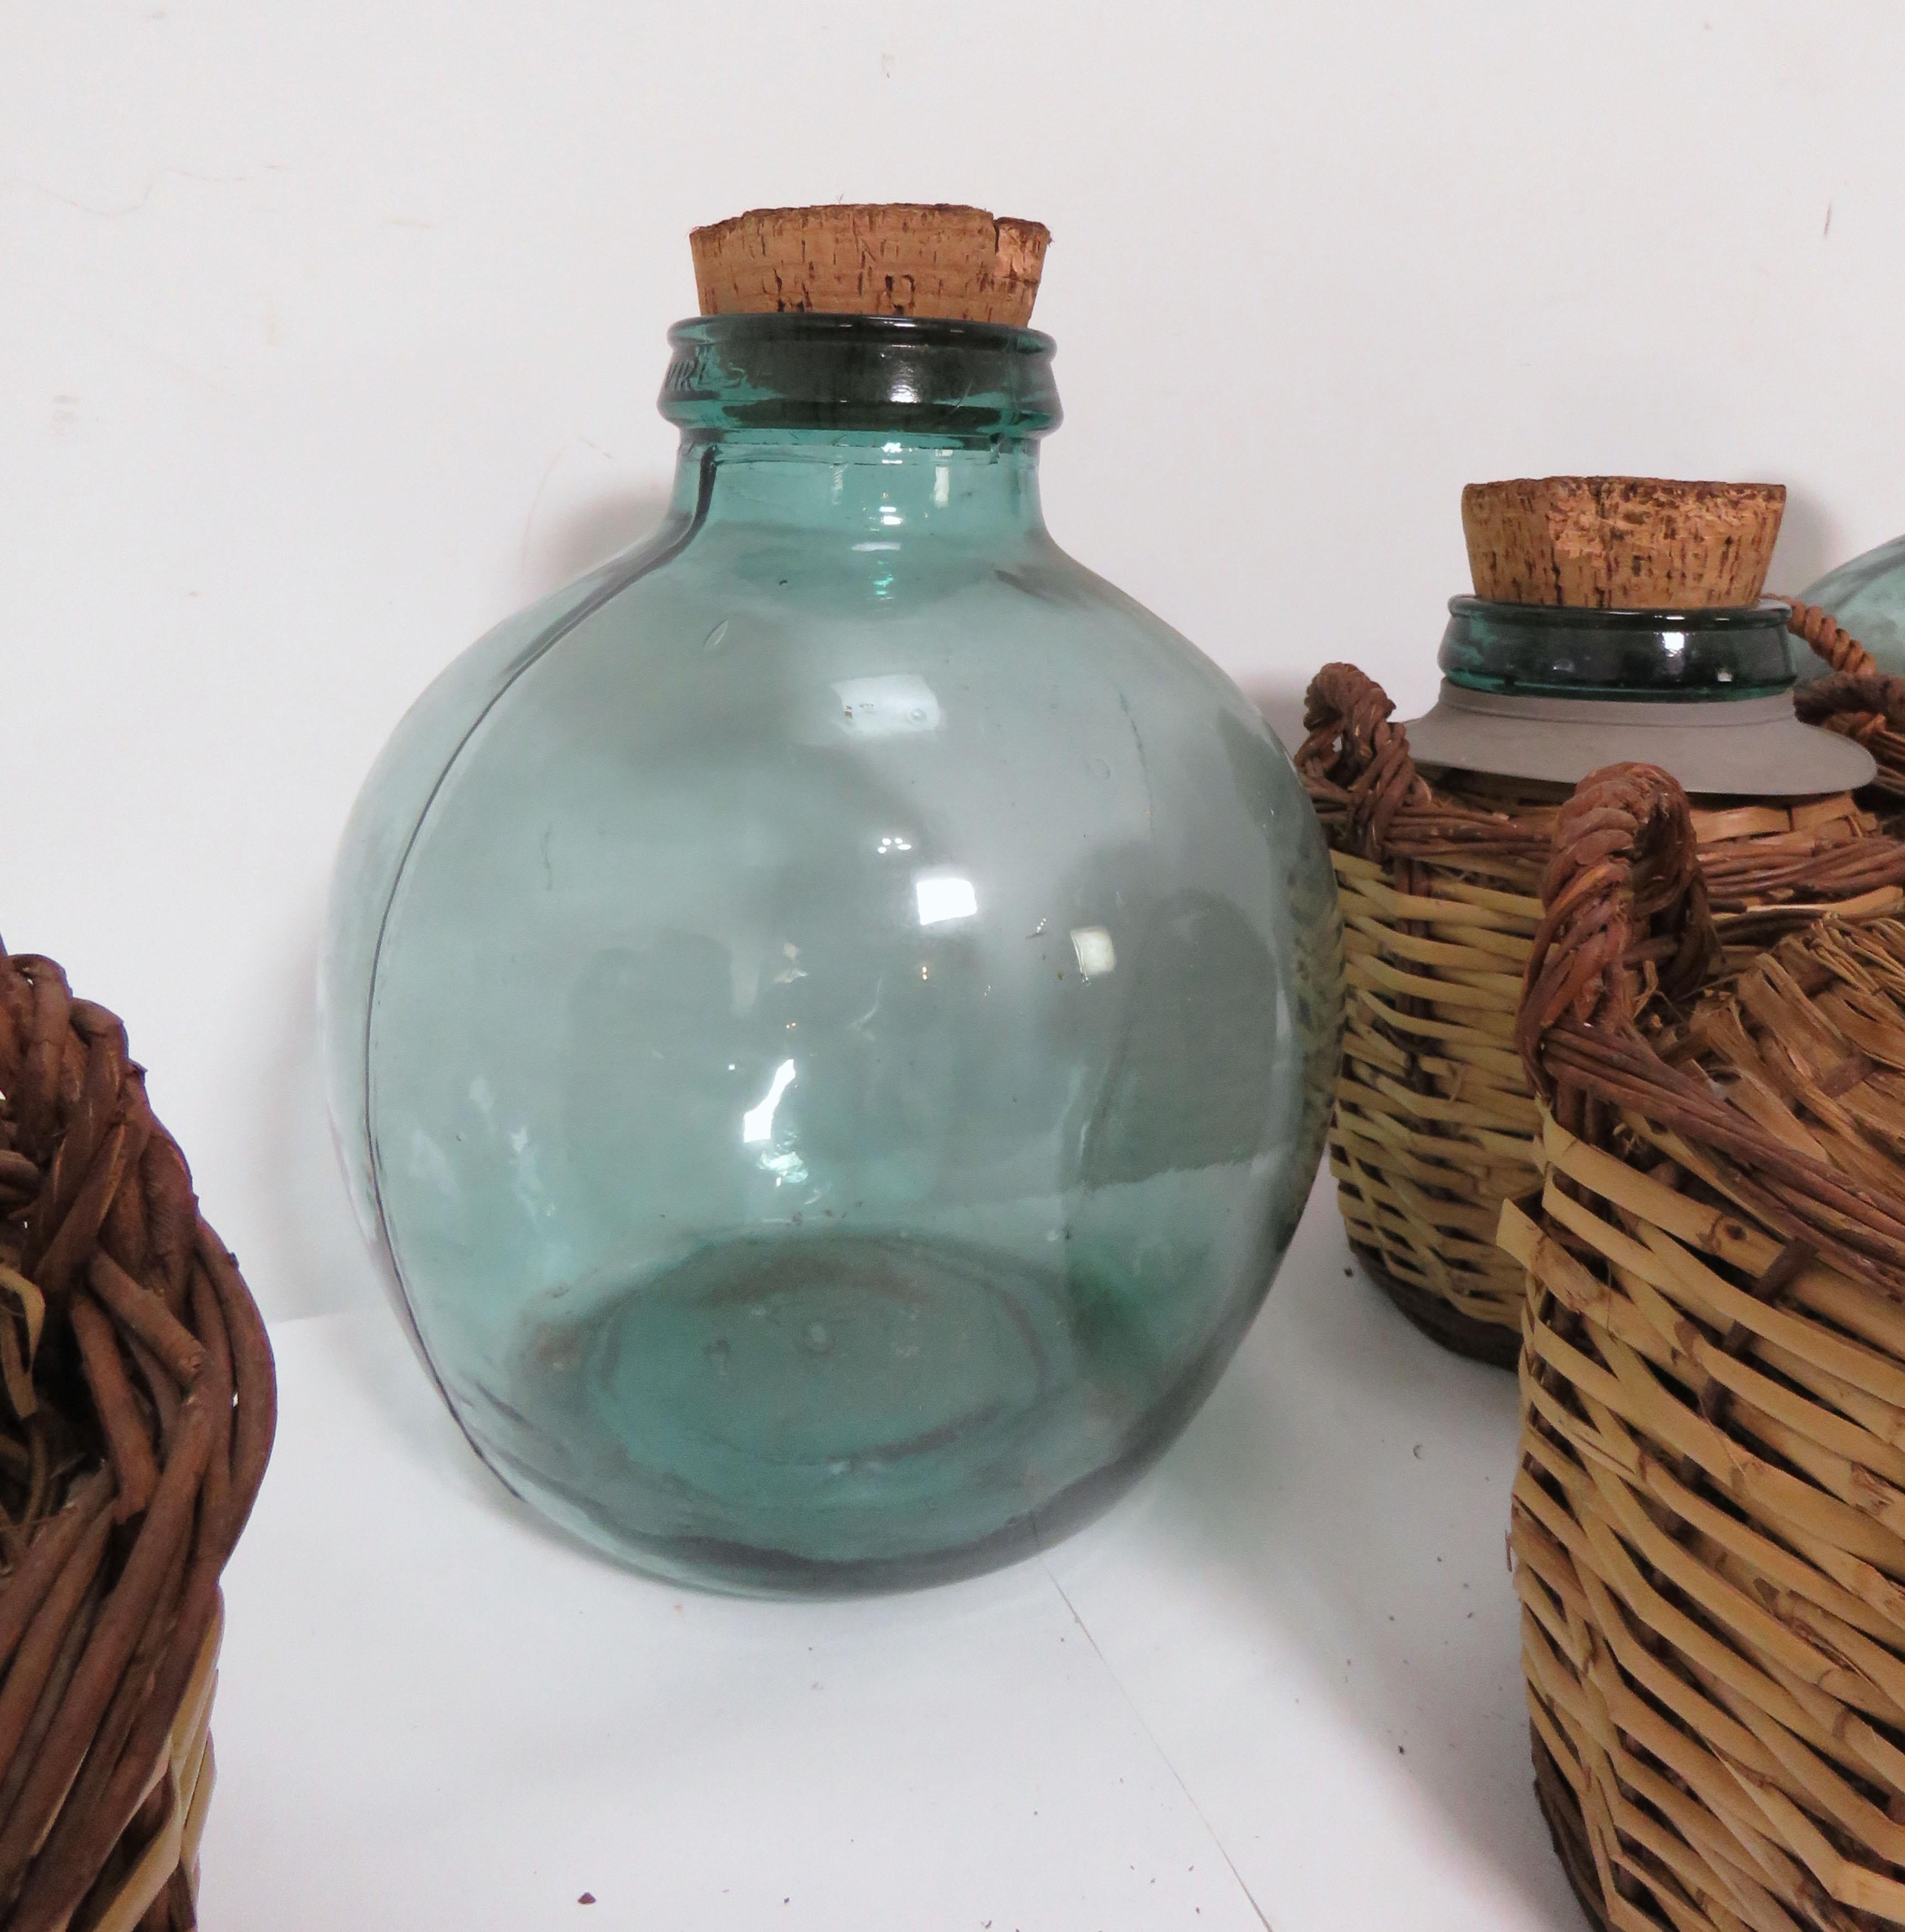 Rattan Collection of Seven Antique French Demijohn Carboy Bottles, circa 1930s-1940s